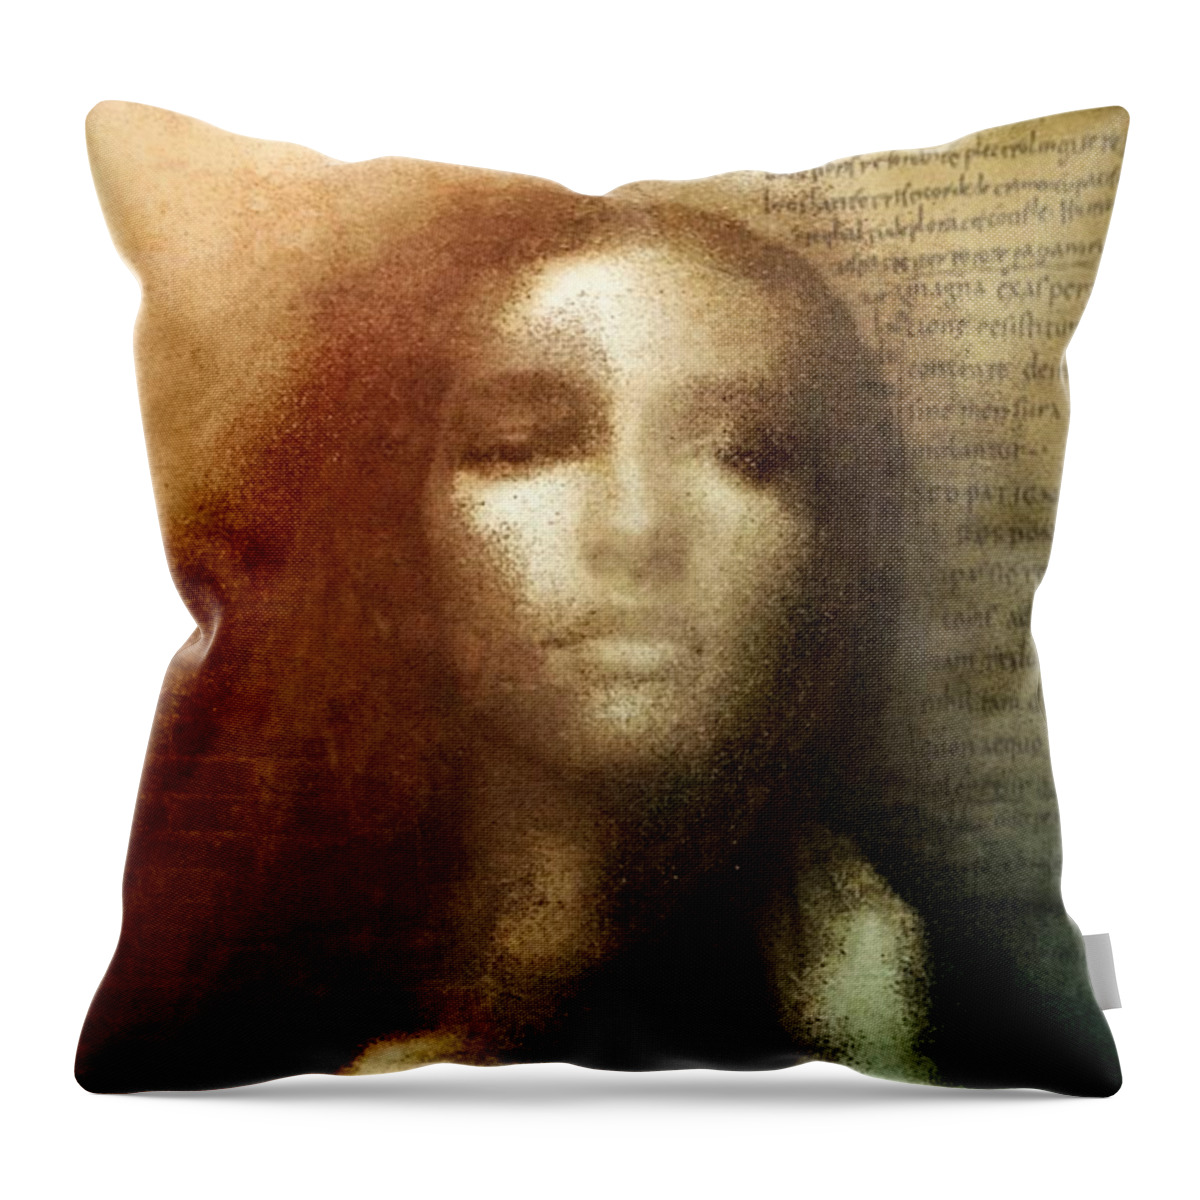 Woman Throw Pillow featuring the digital art Which is my fate by Gun Legler